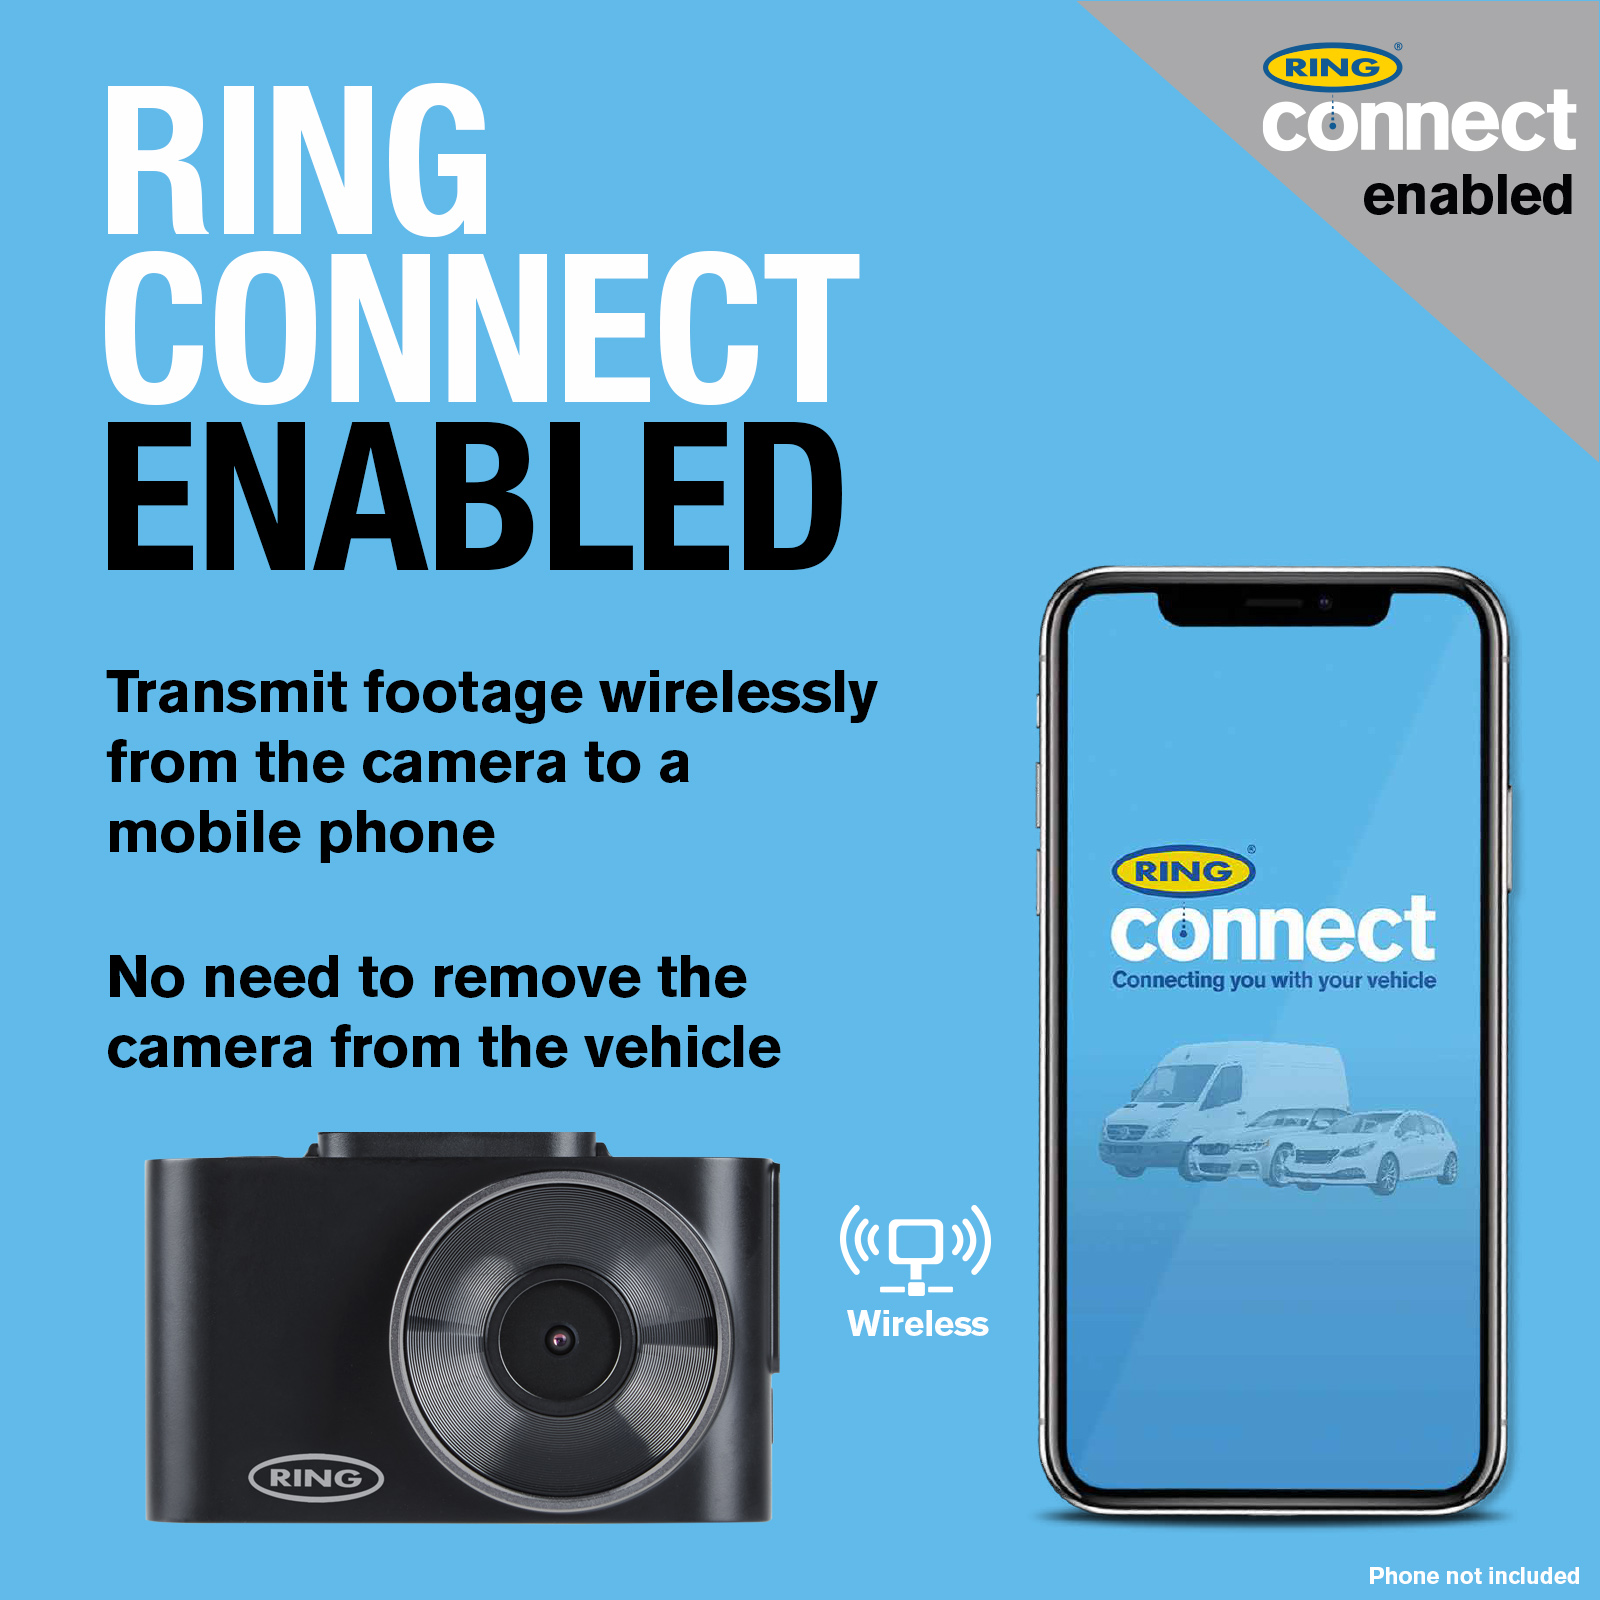 https://www.ringautomotive.com/files/myimages/product/Dash%20camera/RSDC3000/14106%20AMZ%20Square%20RSDC3000%2005%20Ring%20Connect%20enabled%201600x1600px.jpg